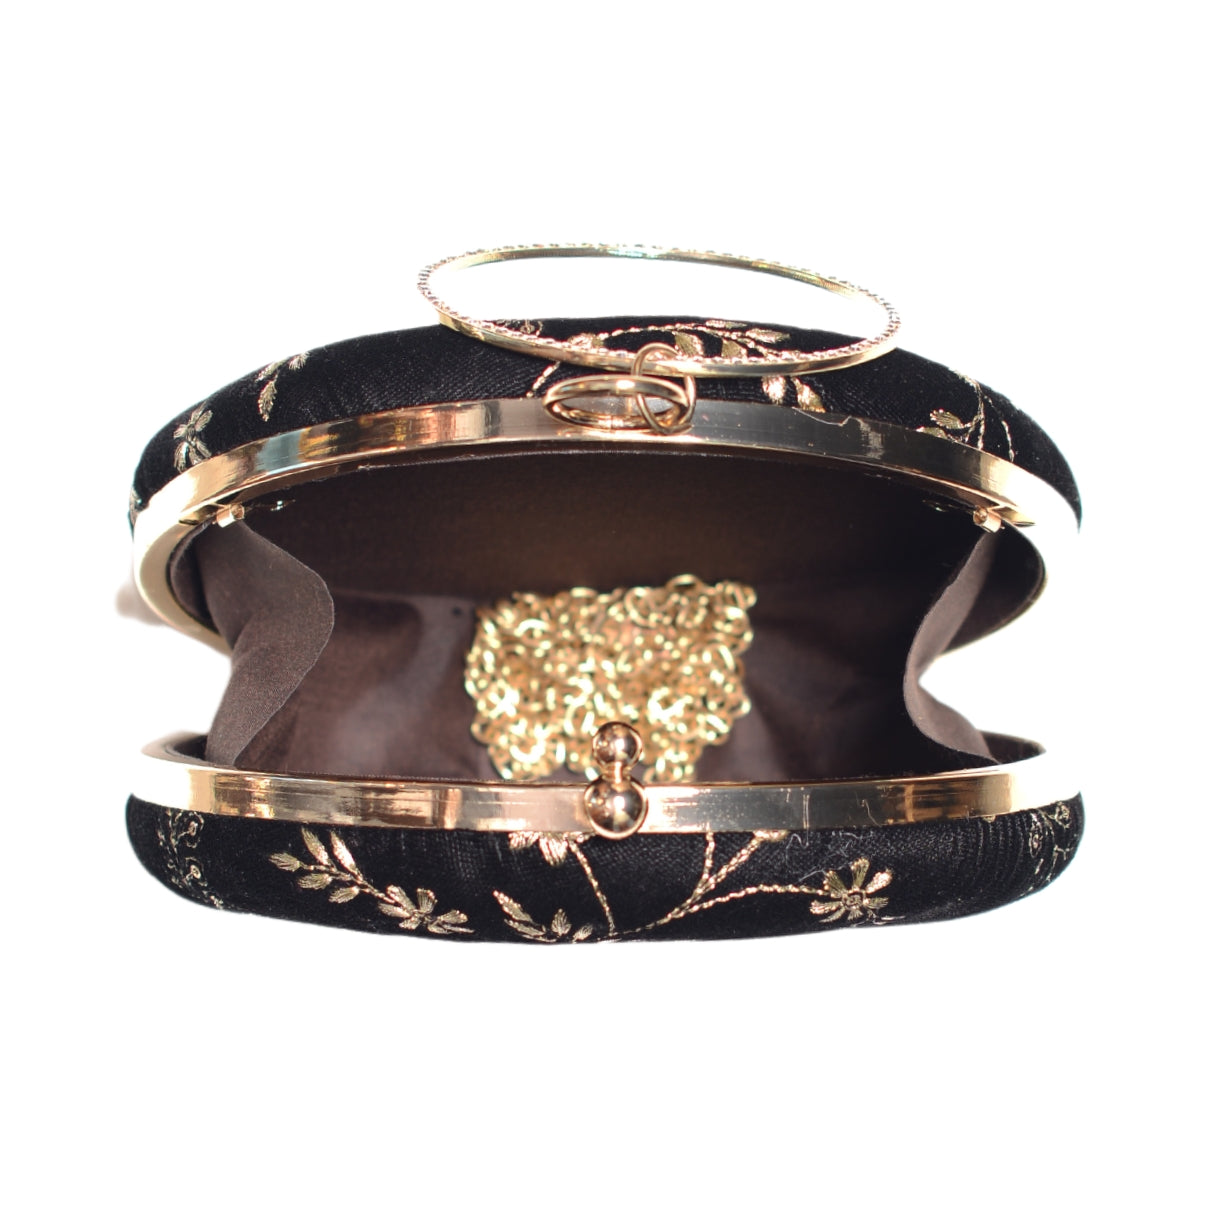 Black And Golden Floral Embroidery Round Clutch